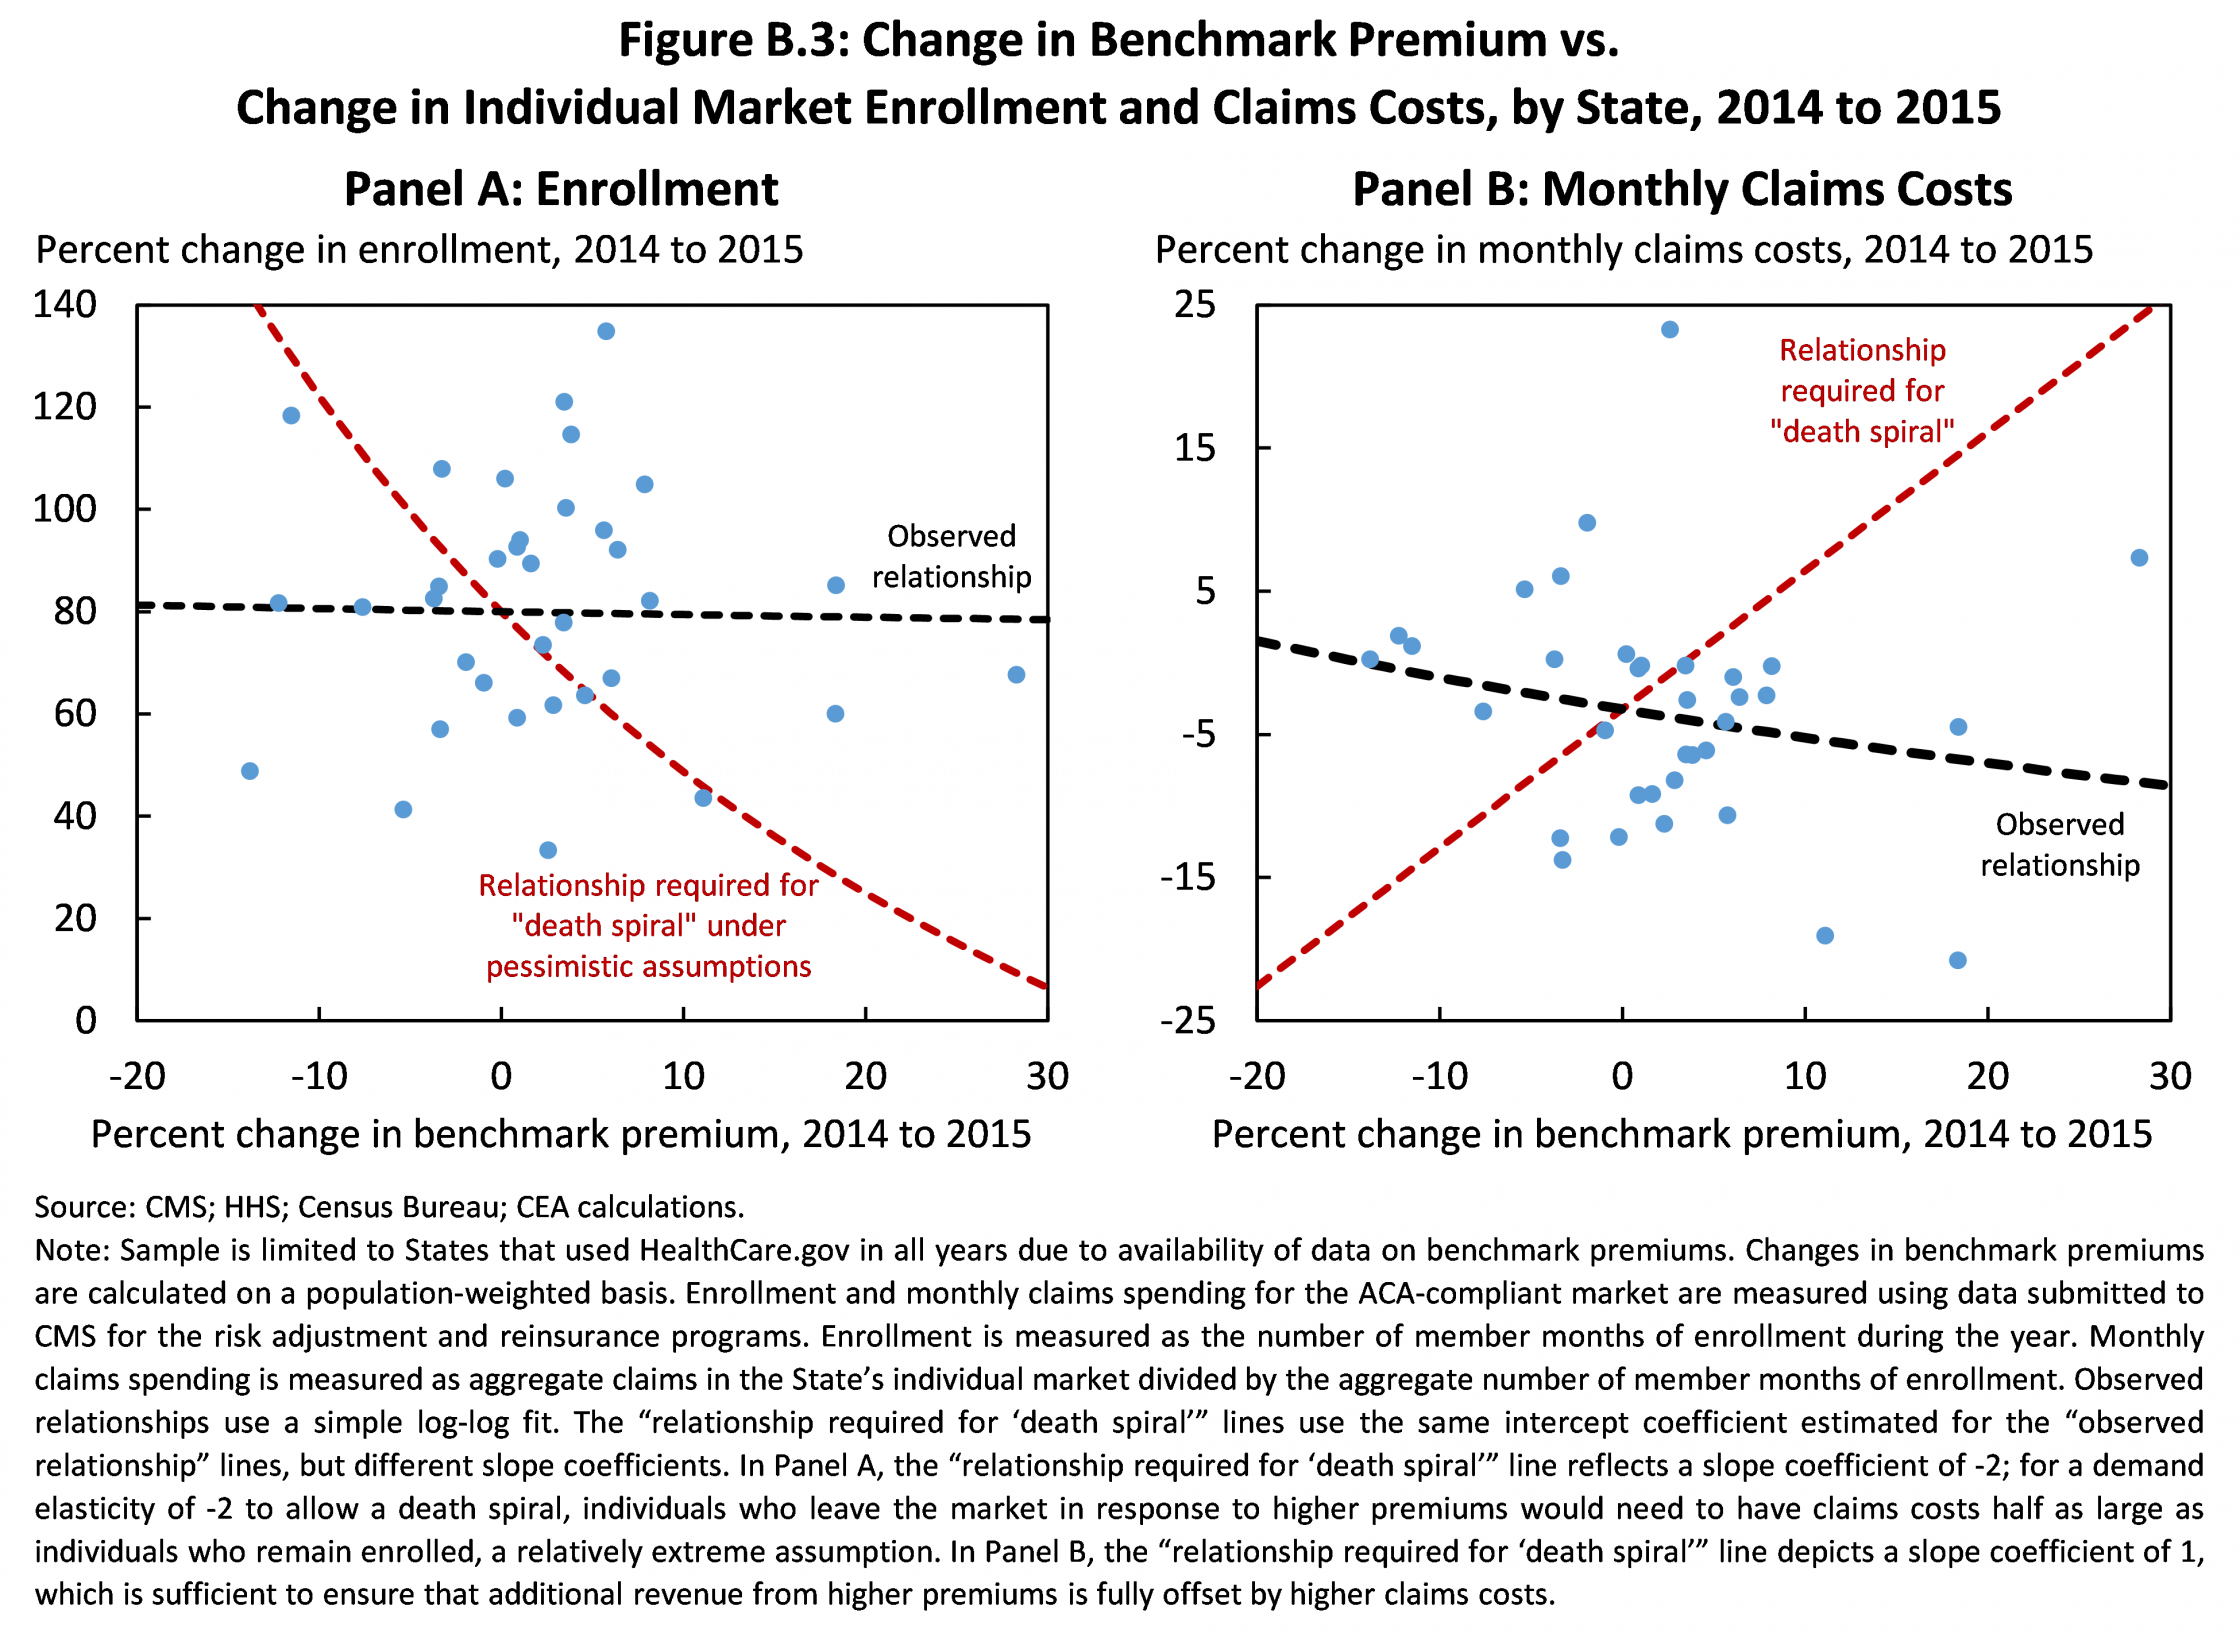 Change in Benchmark Premium versus Change in Individual Market Enrollment and Claims Costs, by State, 2014 to 2015